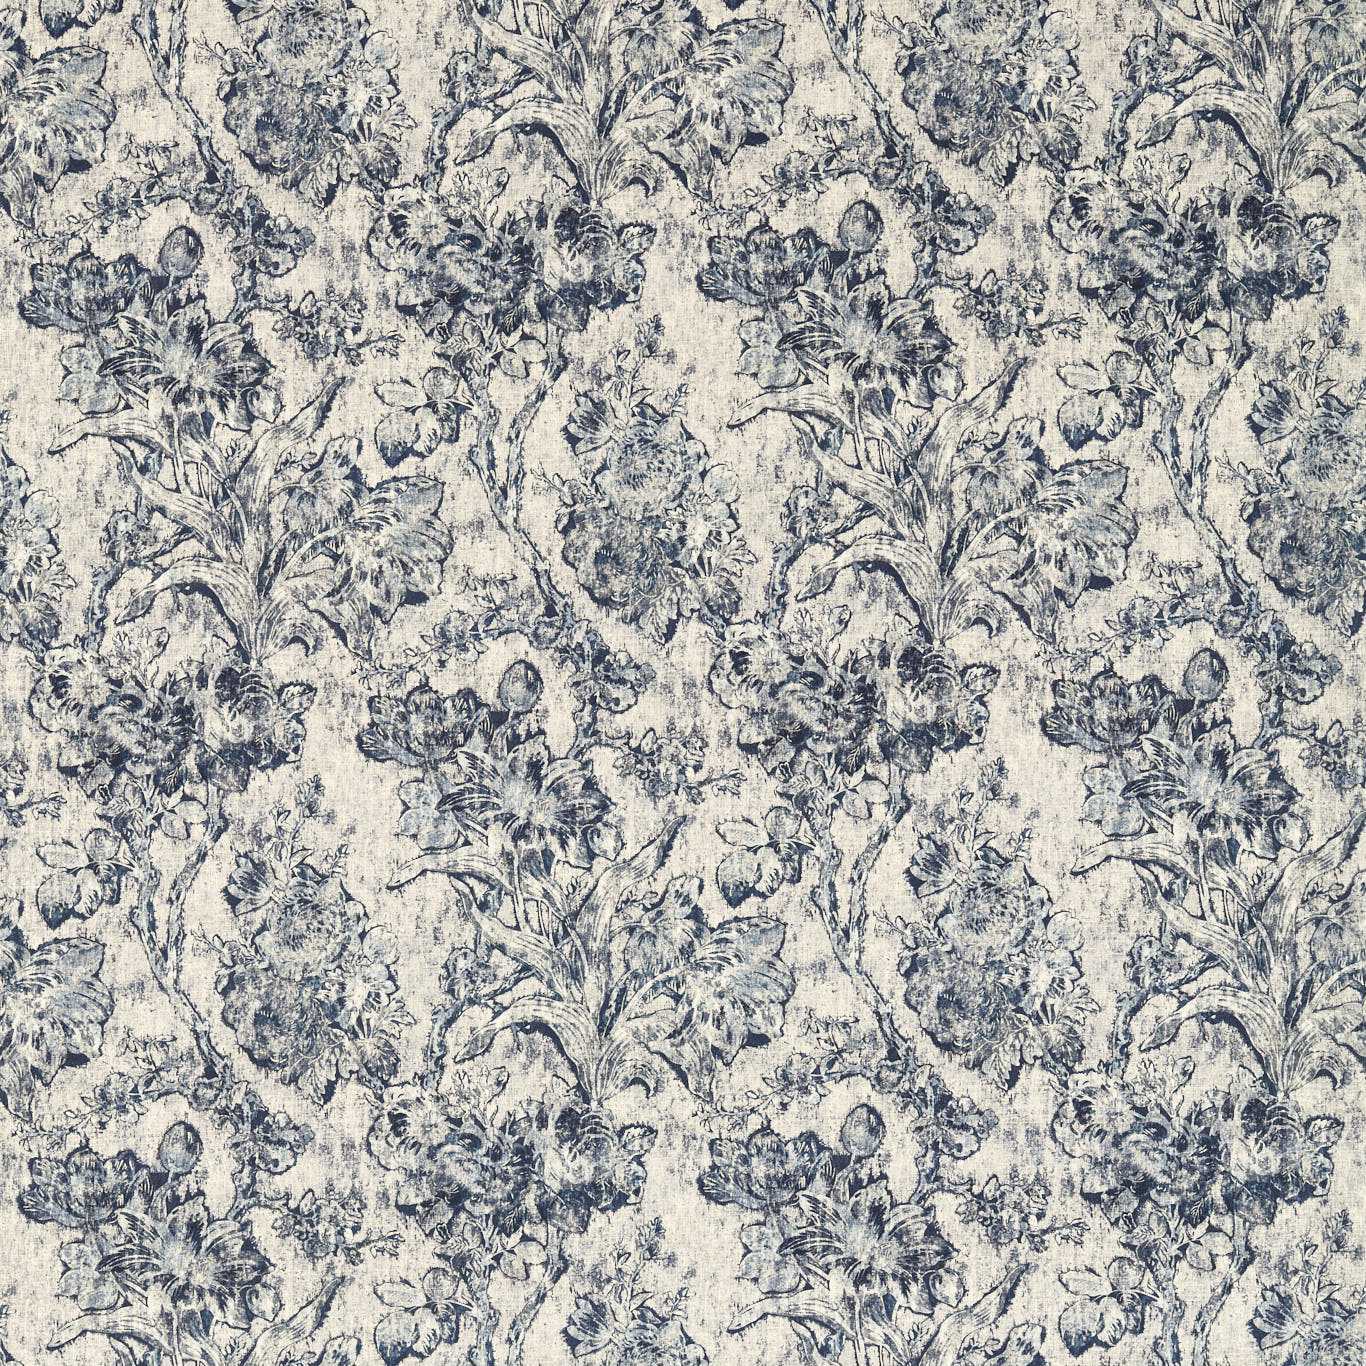 Fringed Tulip Toile Woad Fabric by SAN